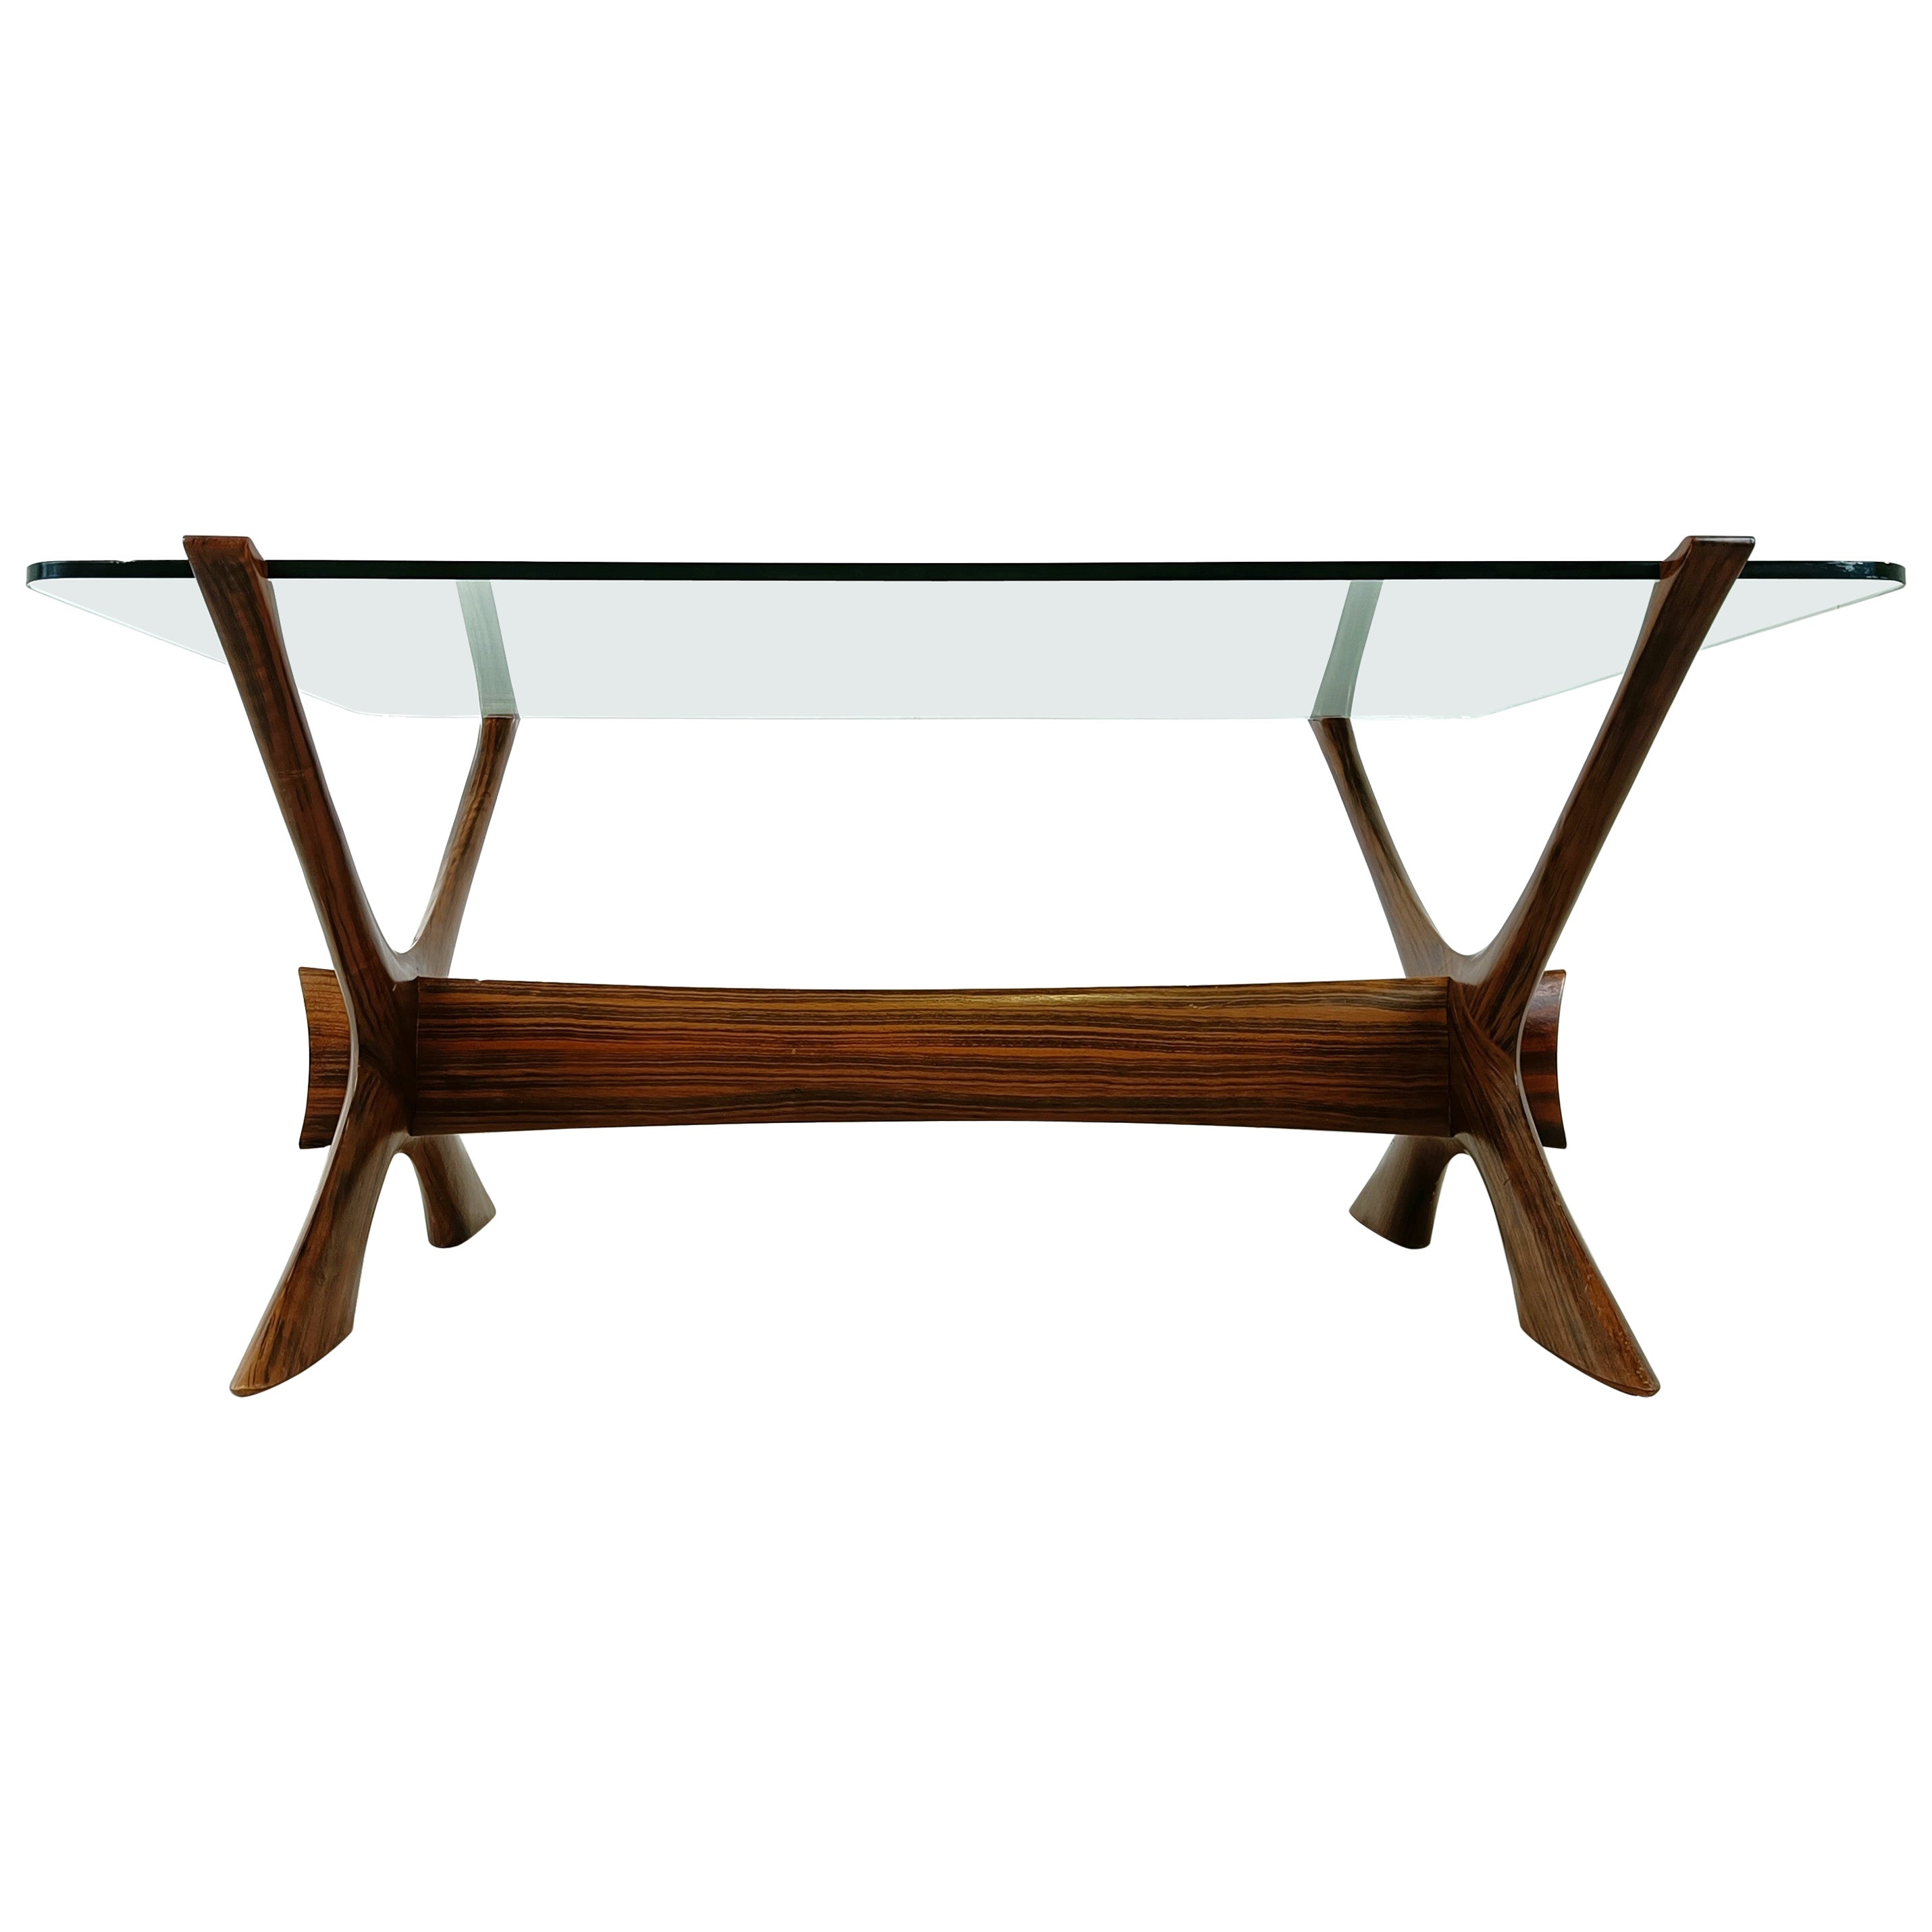 Condor Coffee Table by Fredrik Schriever-Abeln, Sweden, 1960s For Sale